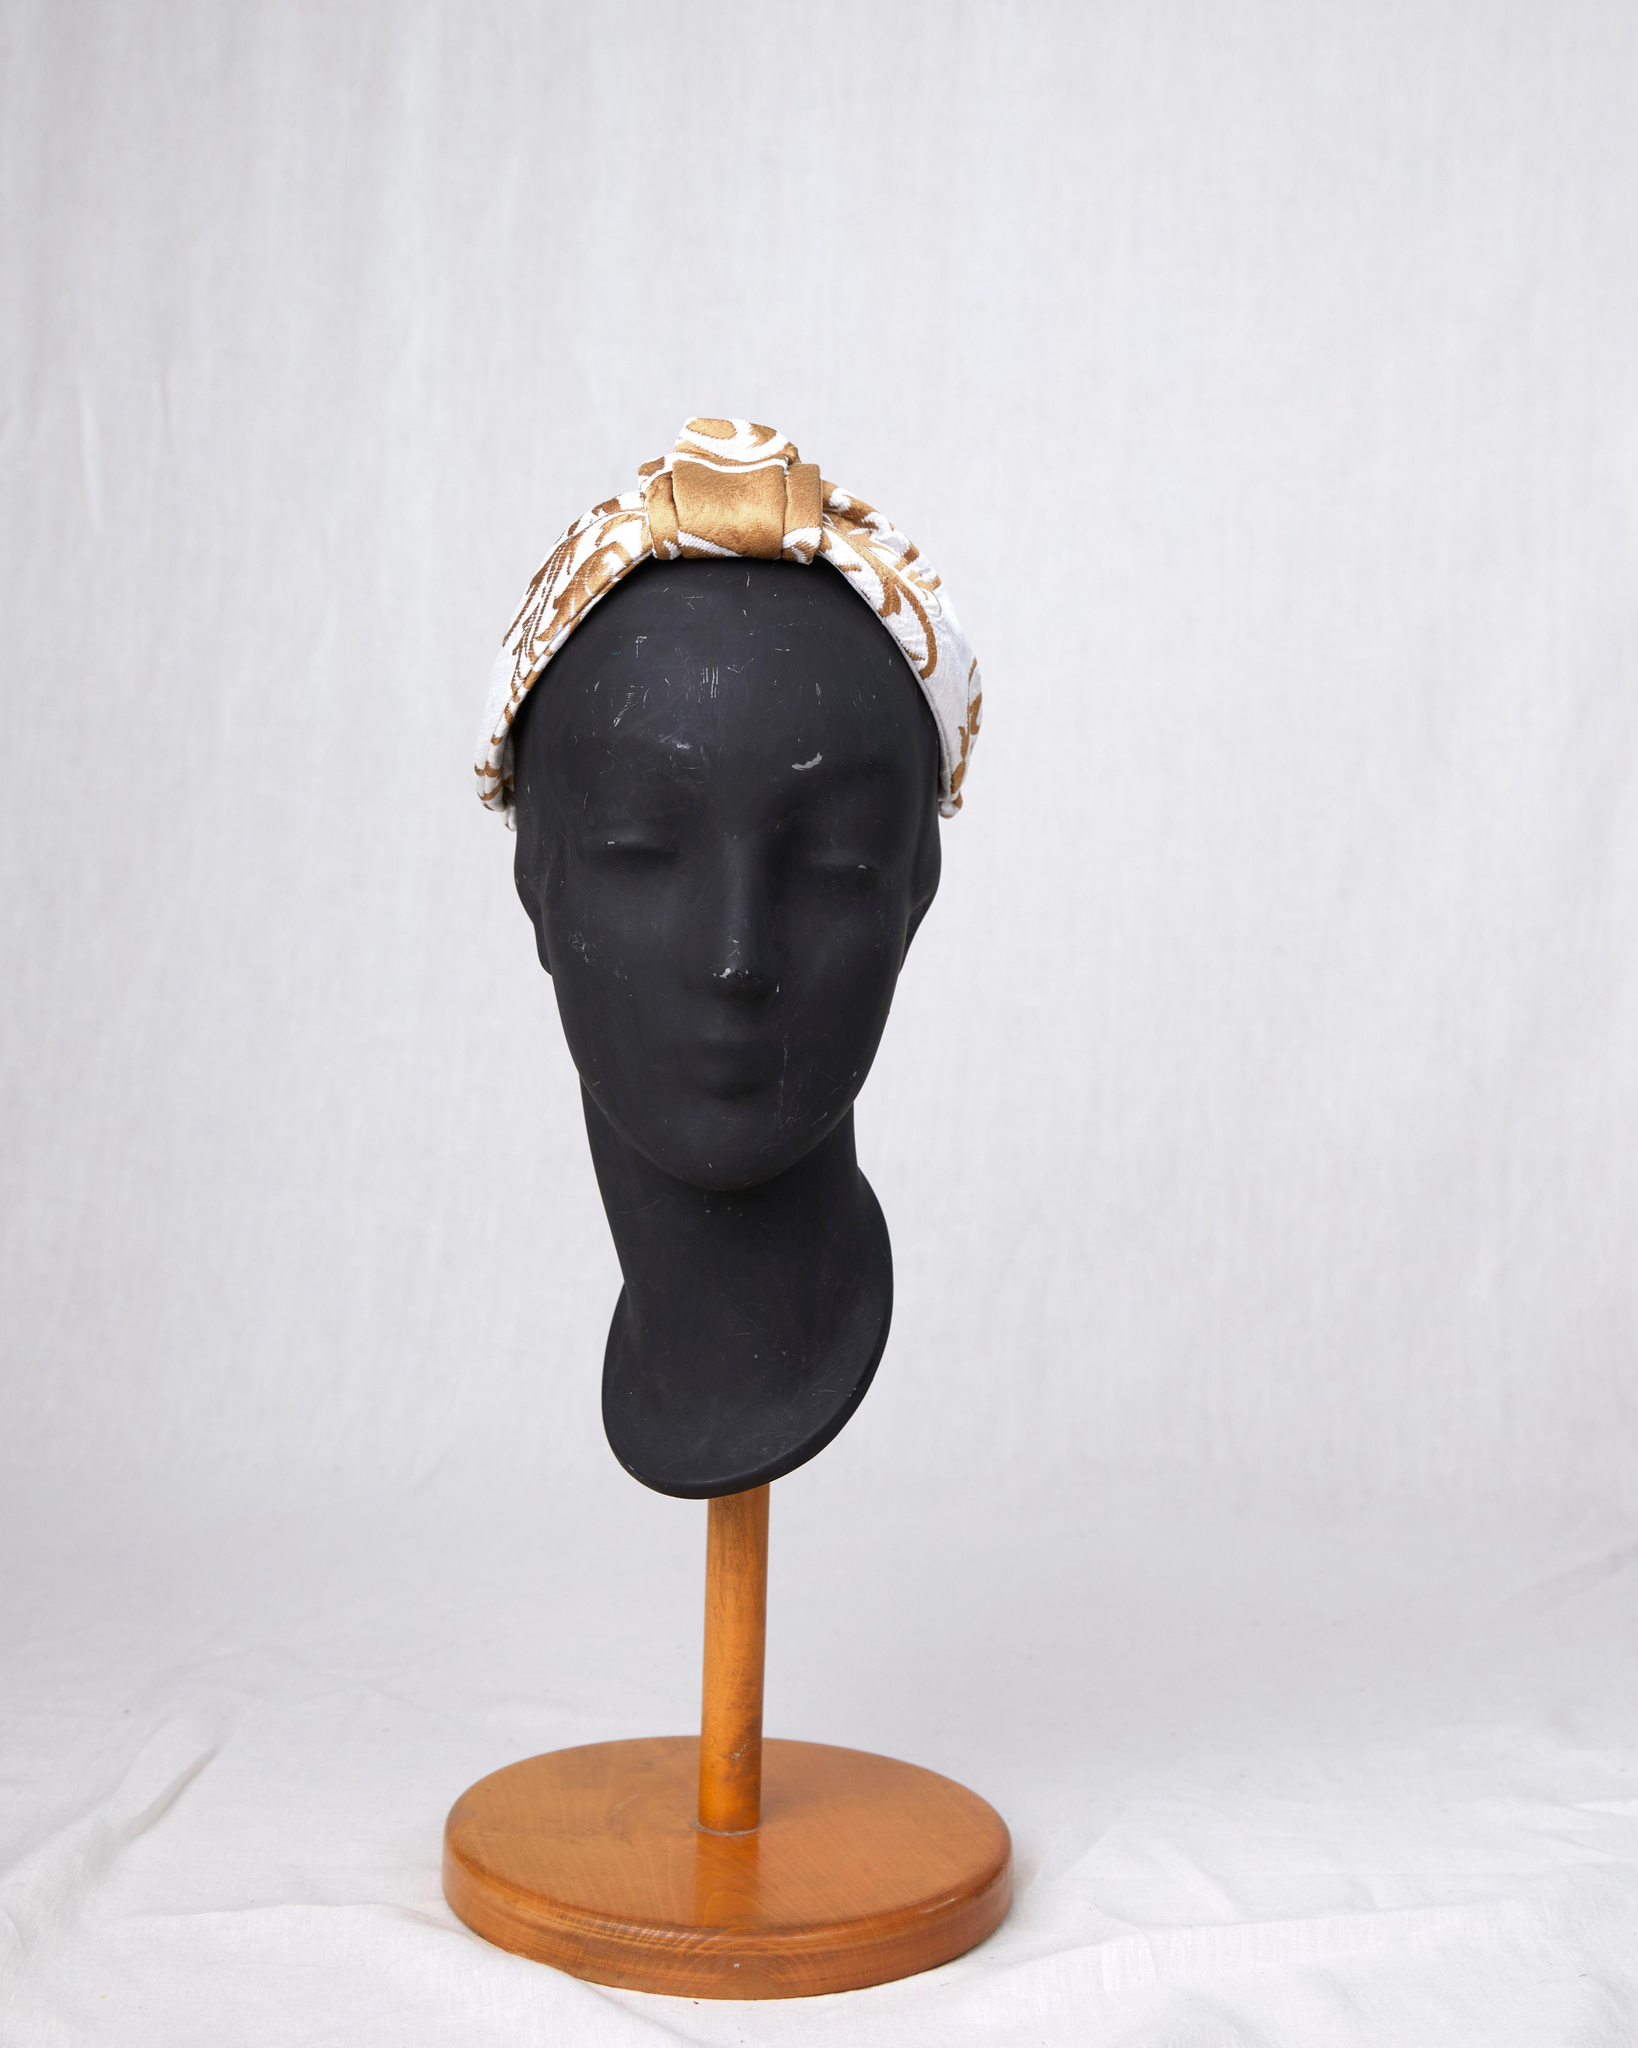 HEADQUARTER | couture headwear Headband 'baroque' made of jacquard fabric. Designed and handcrafted in Switzerland.